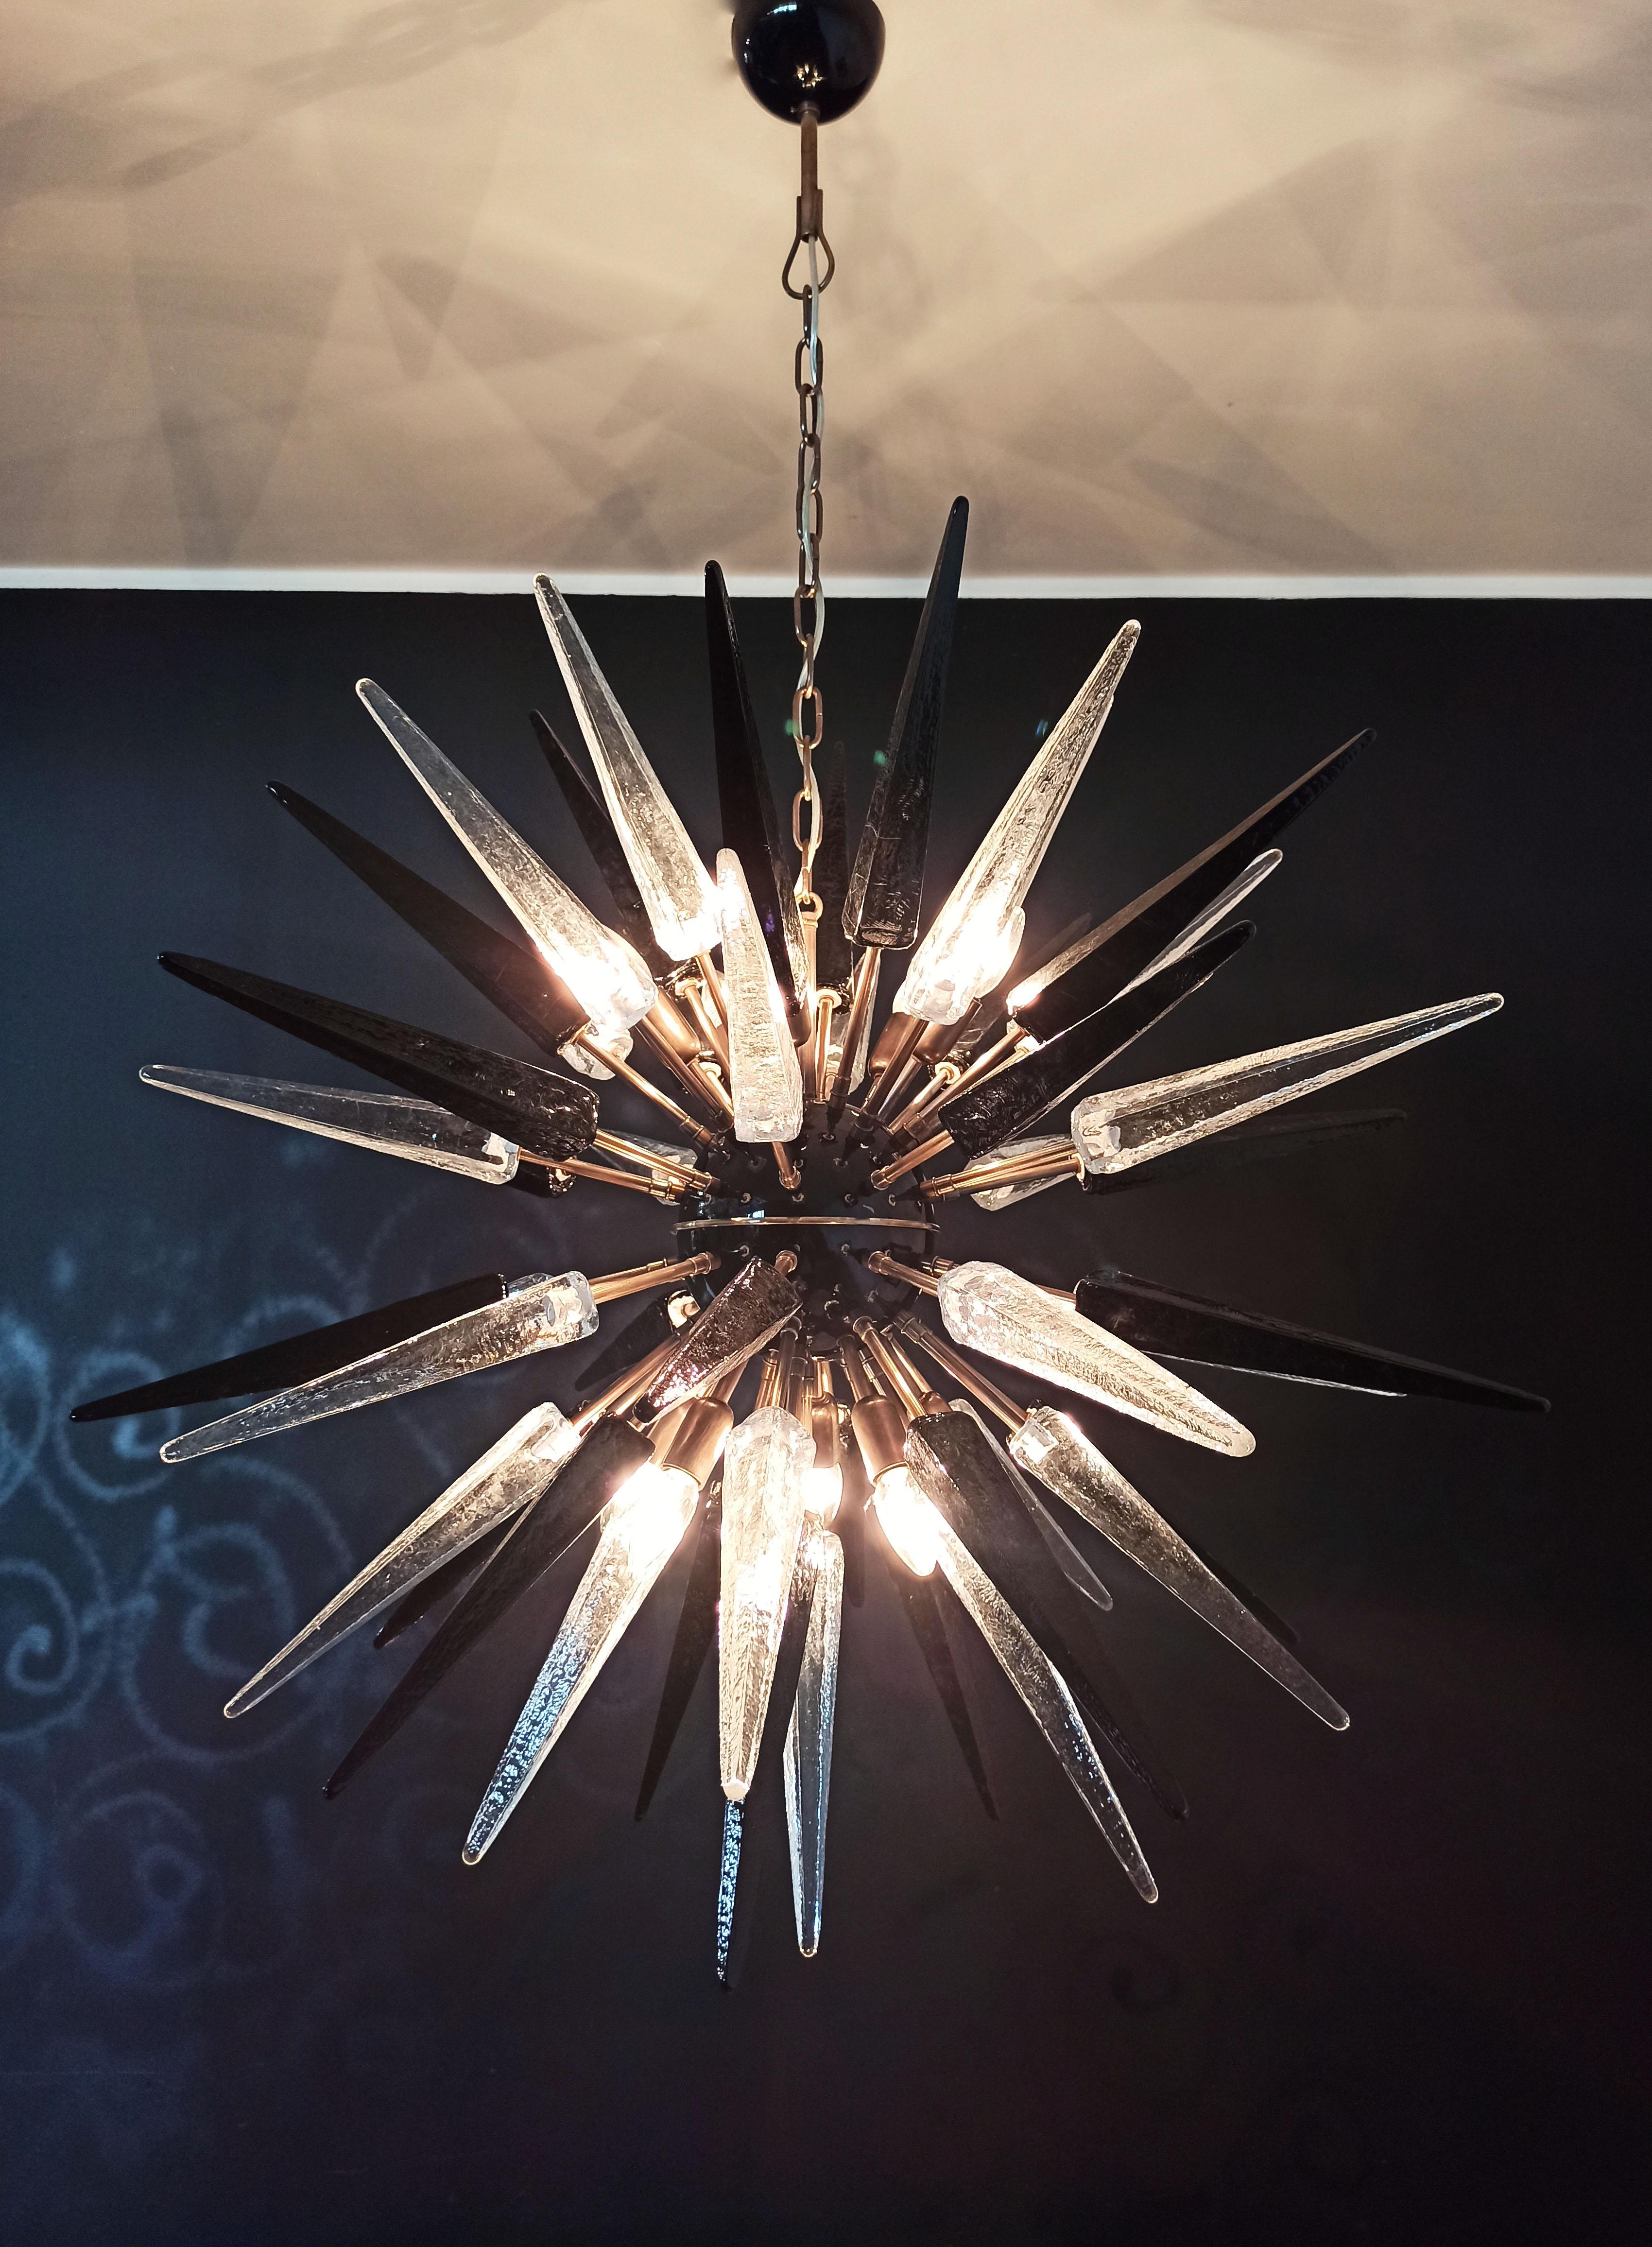 Italian Sputnik chandelier in a black and brass metal, 51 unobtainable transparent and black glass tips. Murano blown glass in a traditional way. 10 light points.
Period: late xx century
Dimensions: 55.10 inches (140 cm) height with chain; 37.40